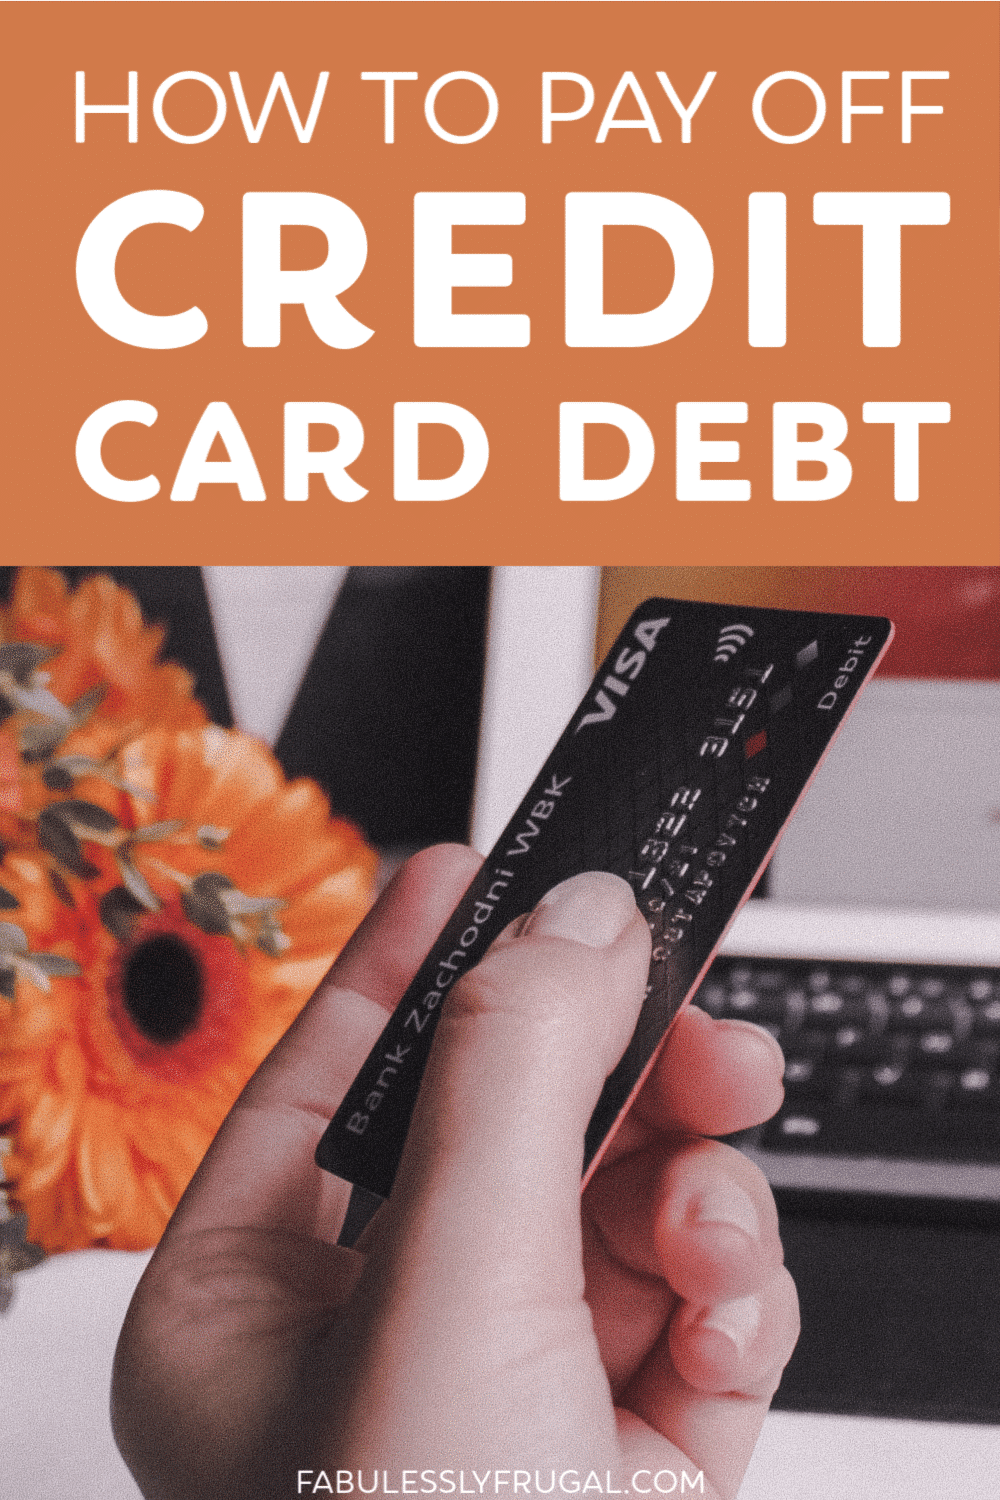 How to pay off credit card debt